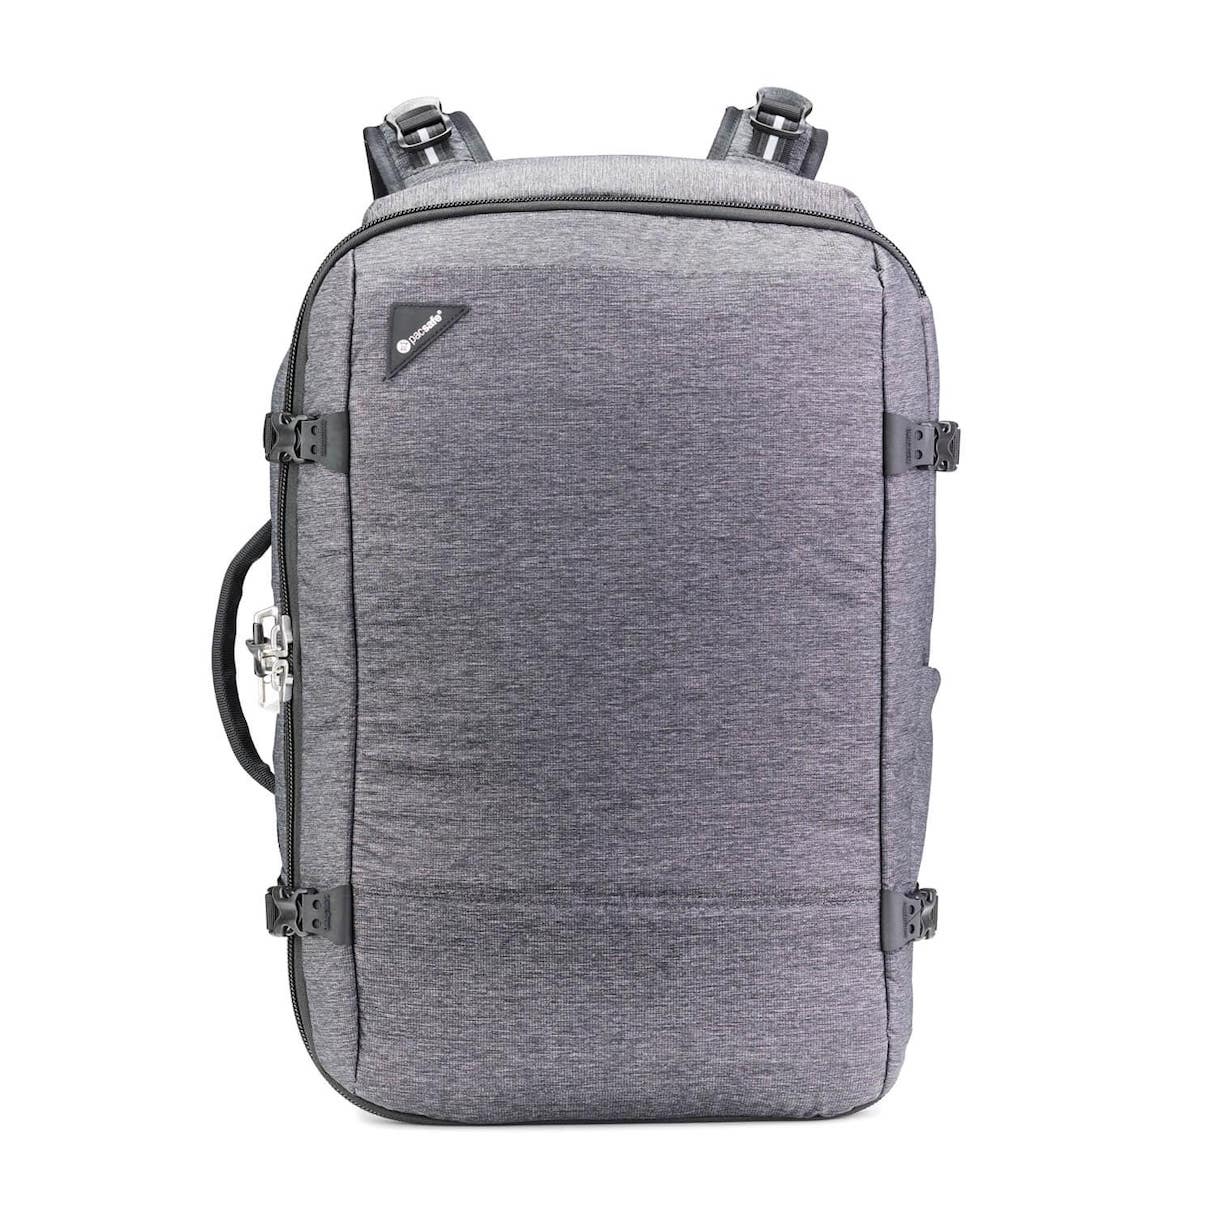 gifts for programmers: backpack